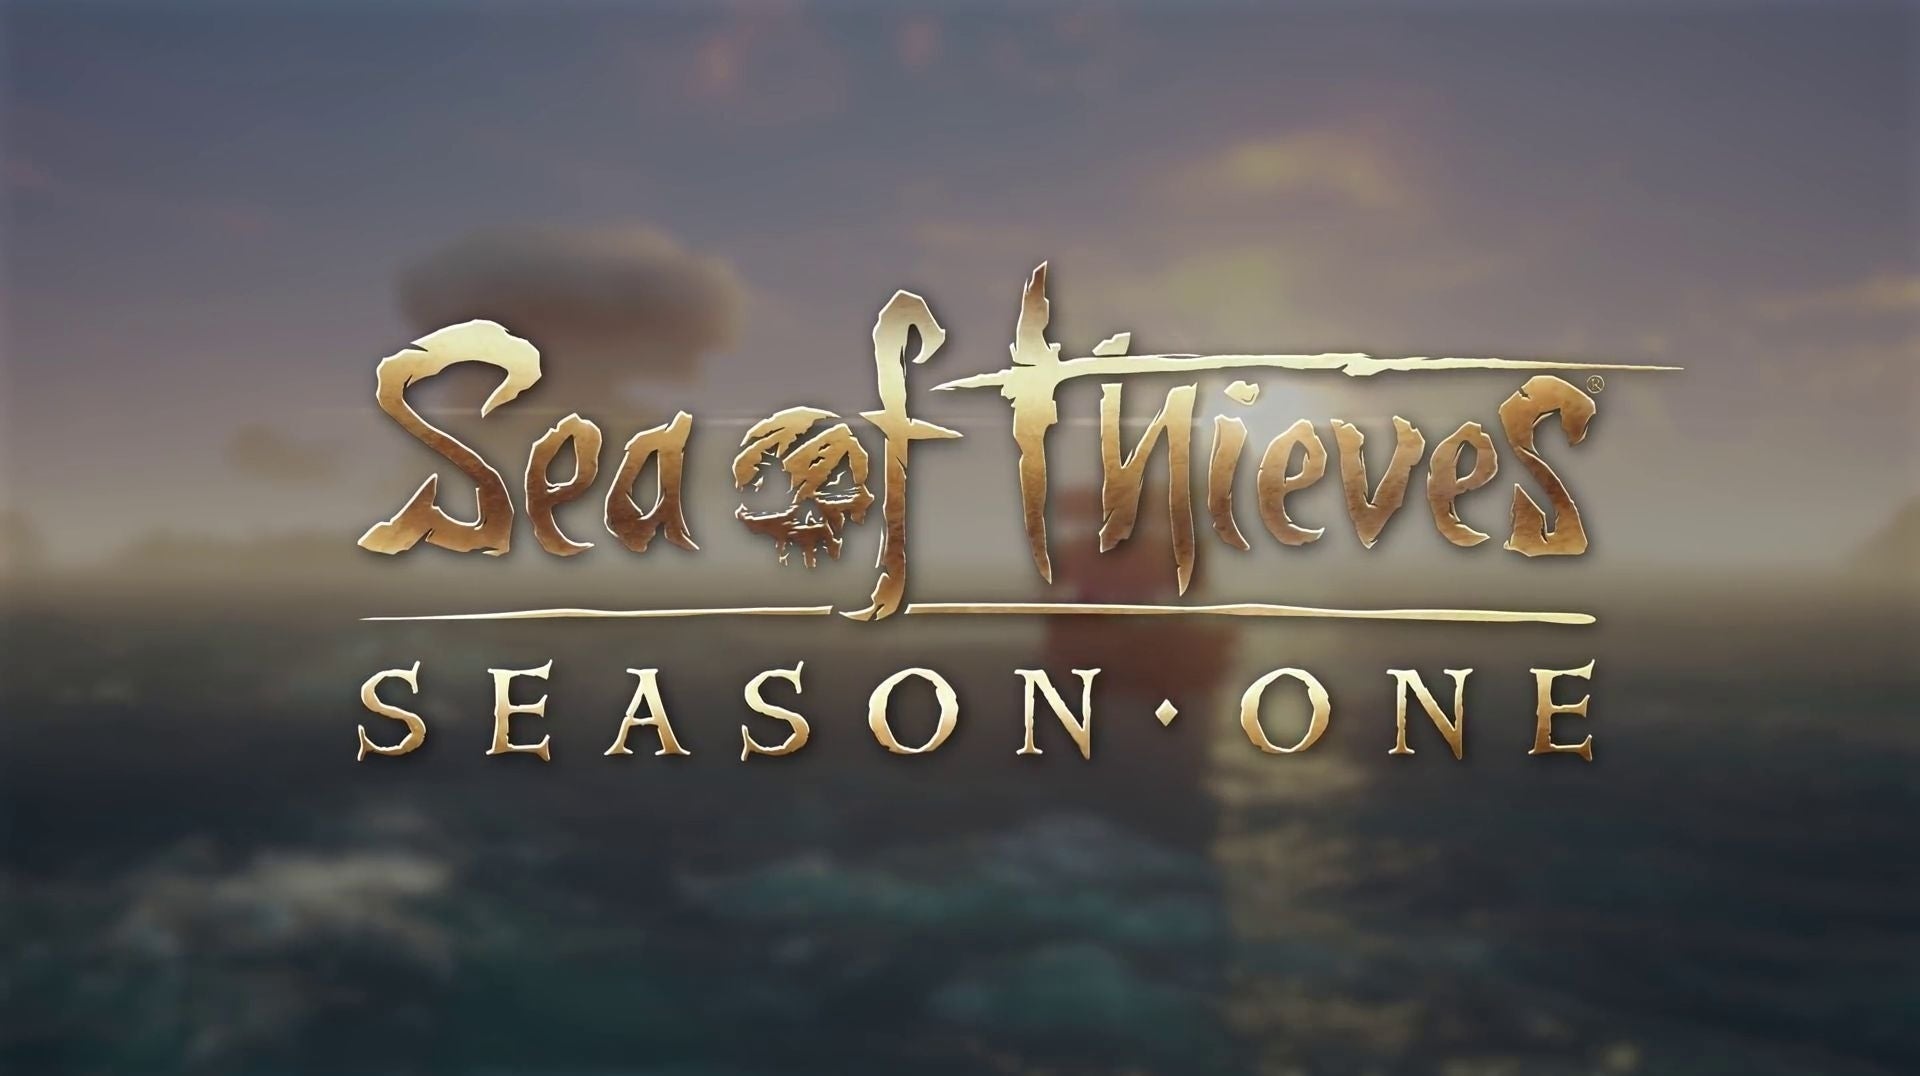 Image for Sea of Thieves Season 1 estimated release time, and what's new in Season 1 explained